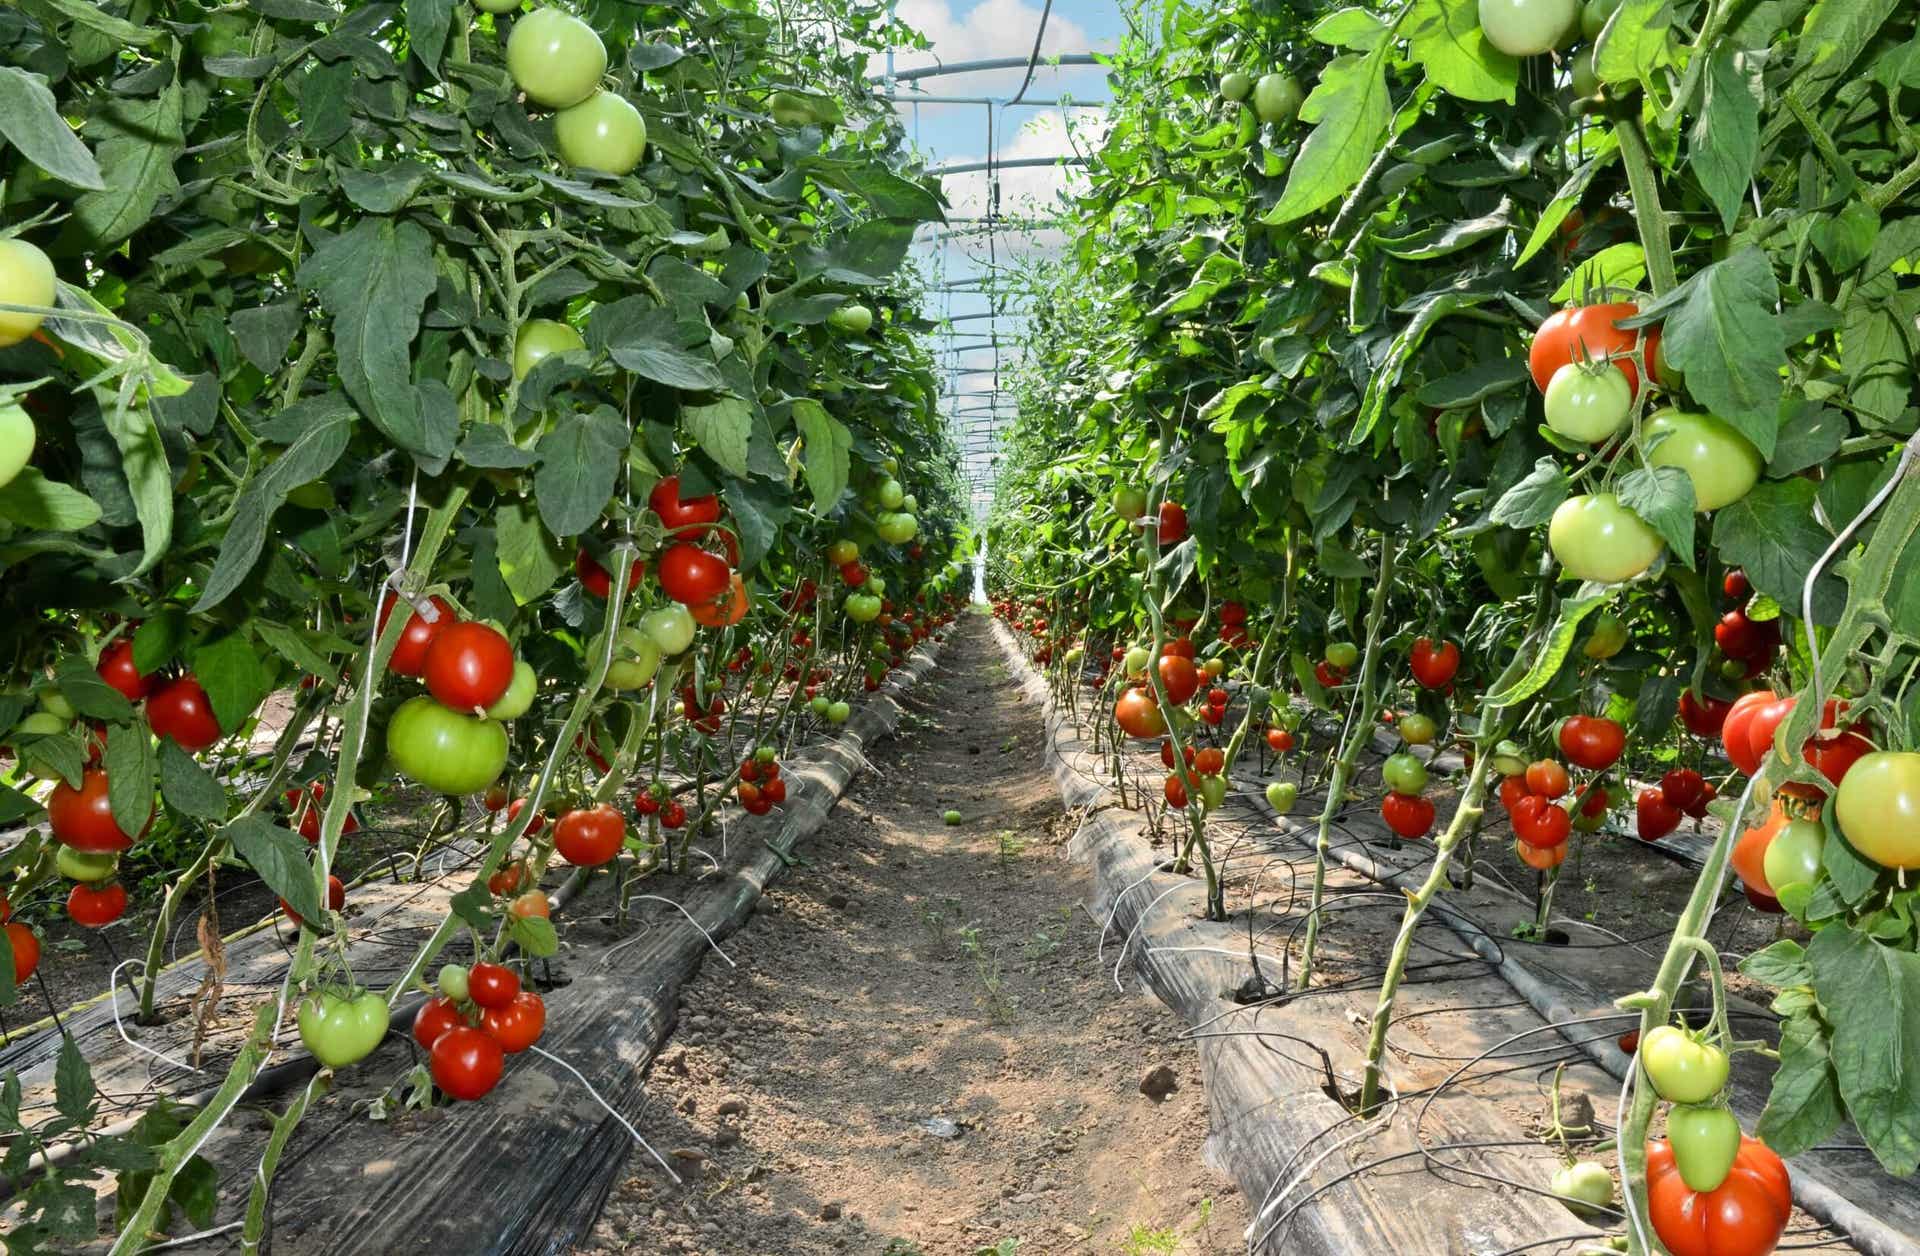 capillary irrigation for tomatoes